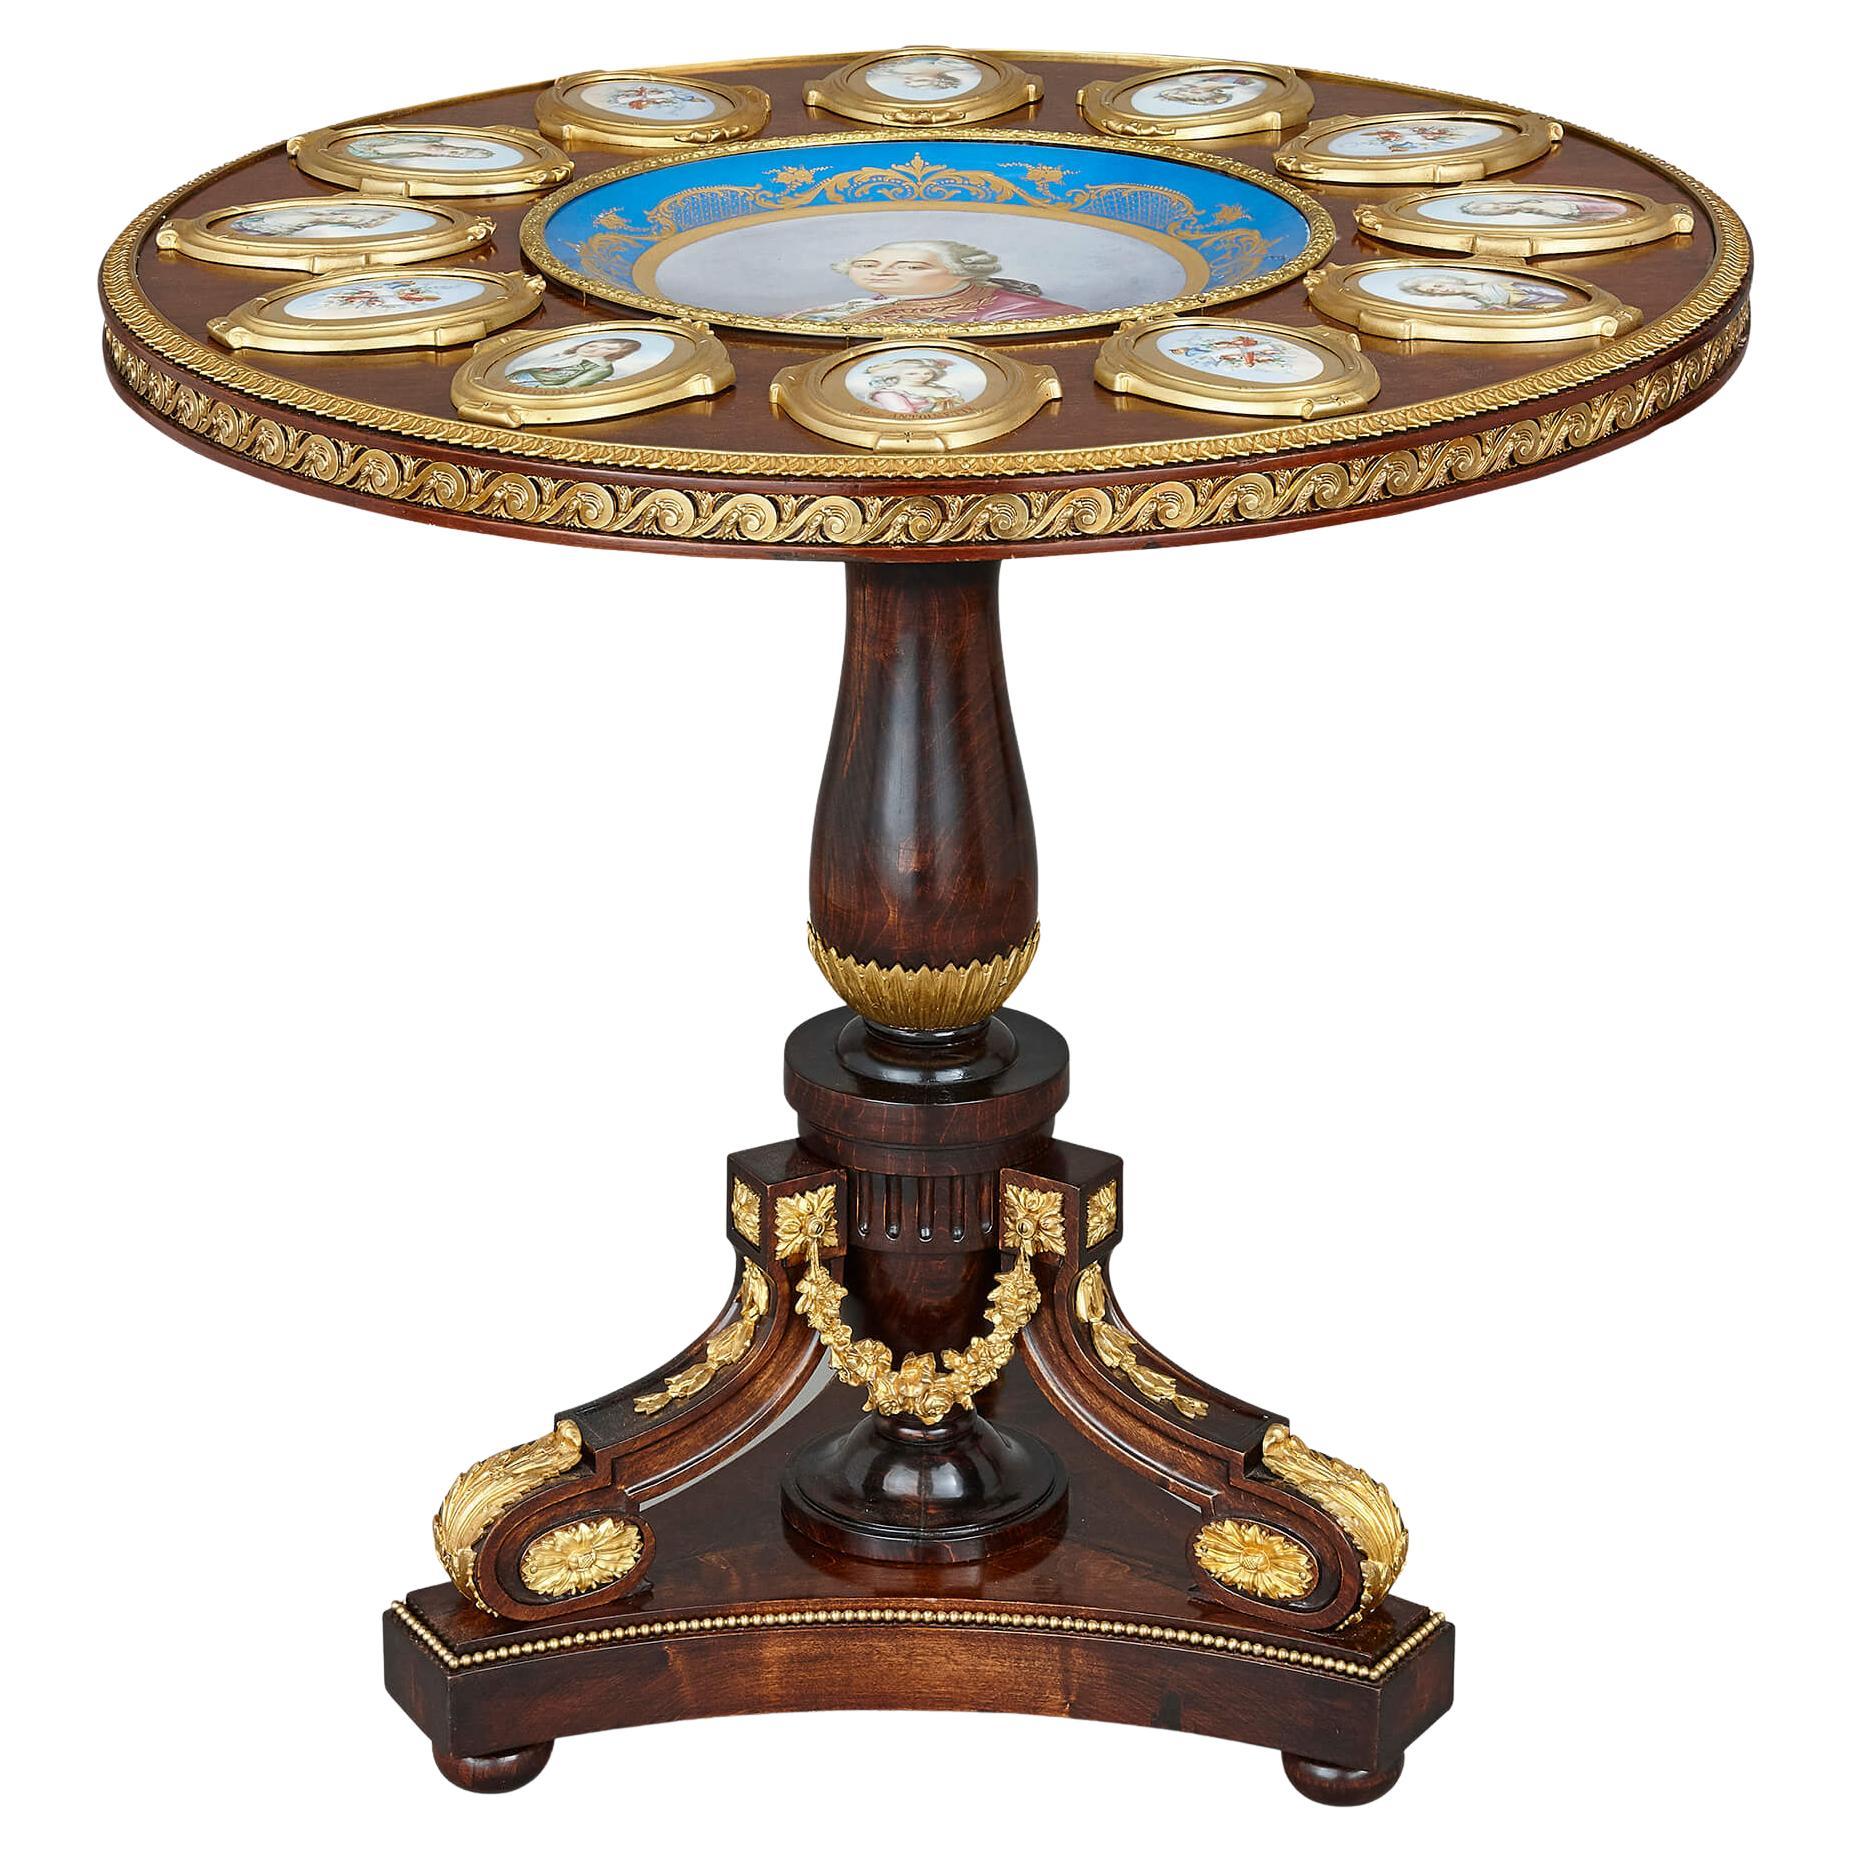 Neoclassical Style Porcelain and Gilt Bronze Mounted Circular Table by Fournier